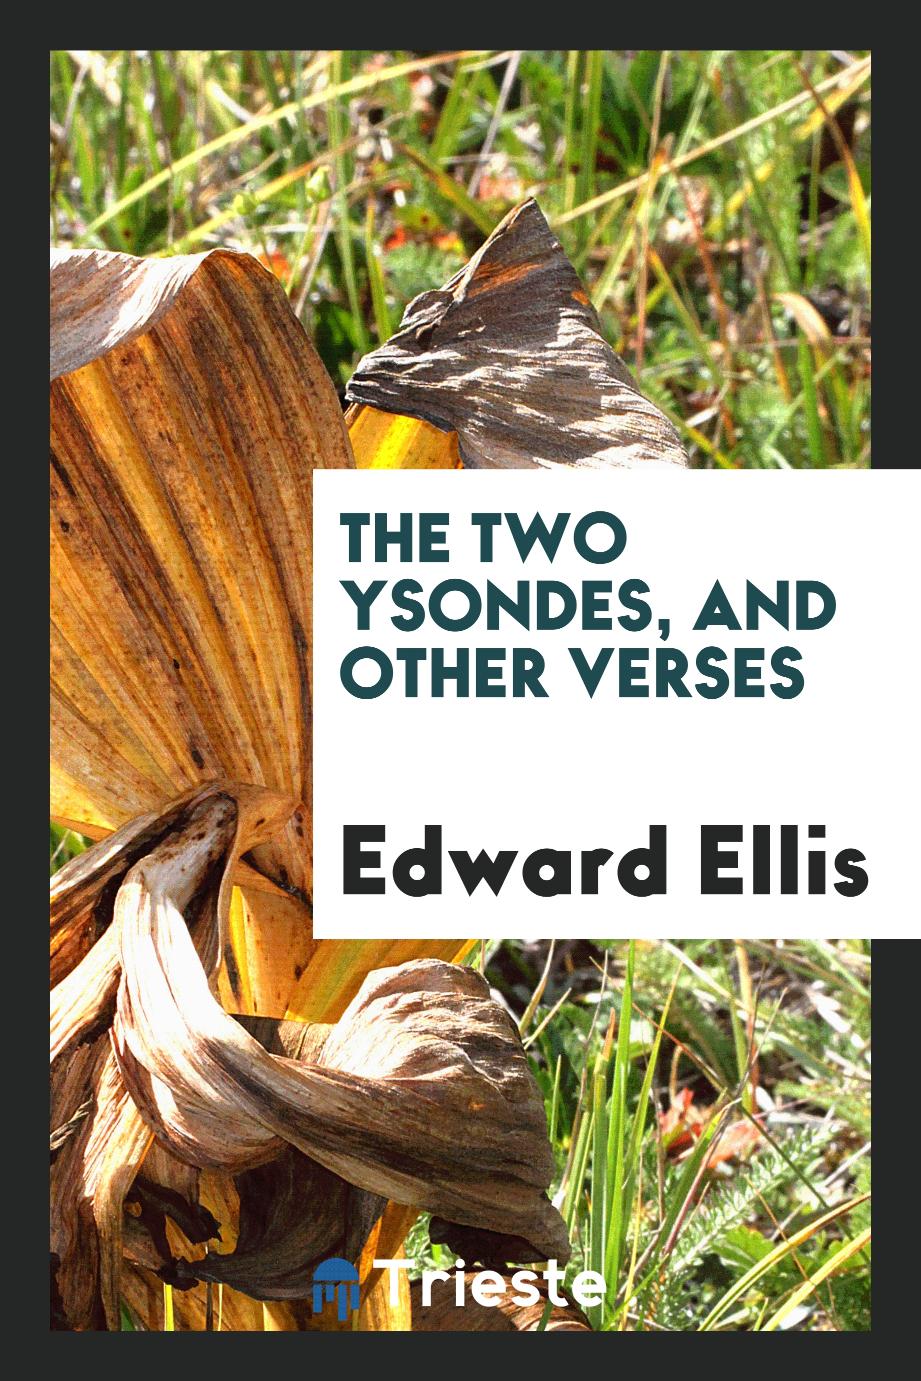 Edward Ellis - The two Ysondes, and other verses